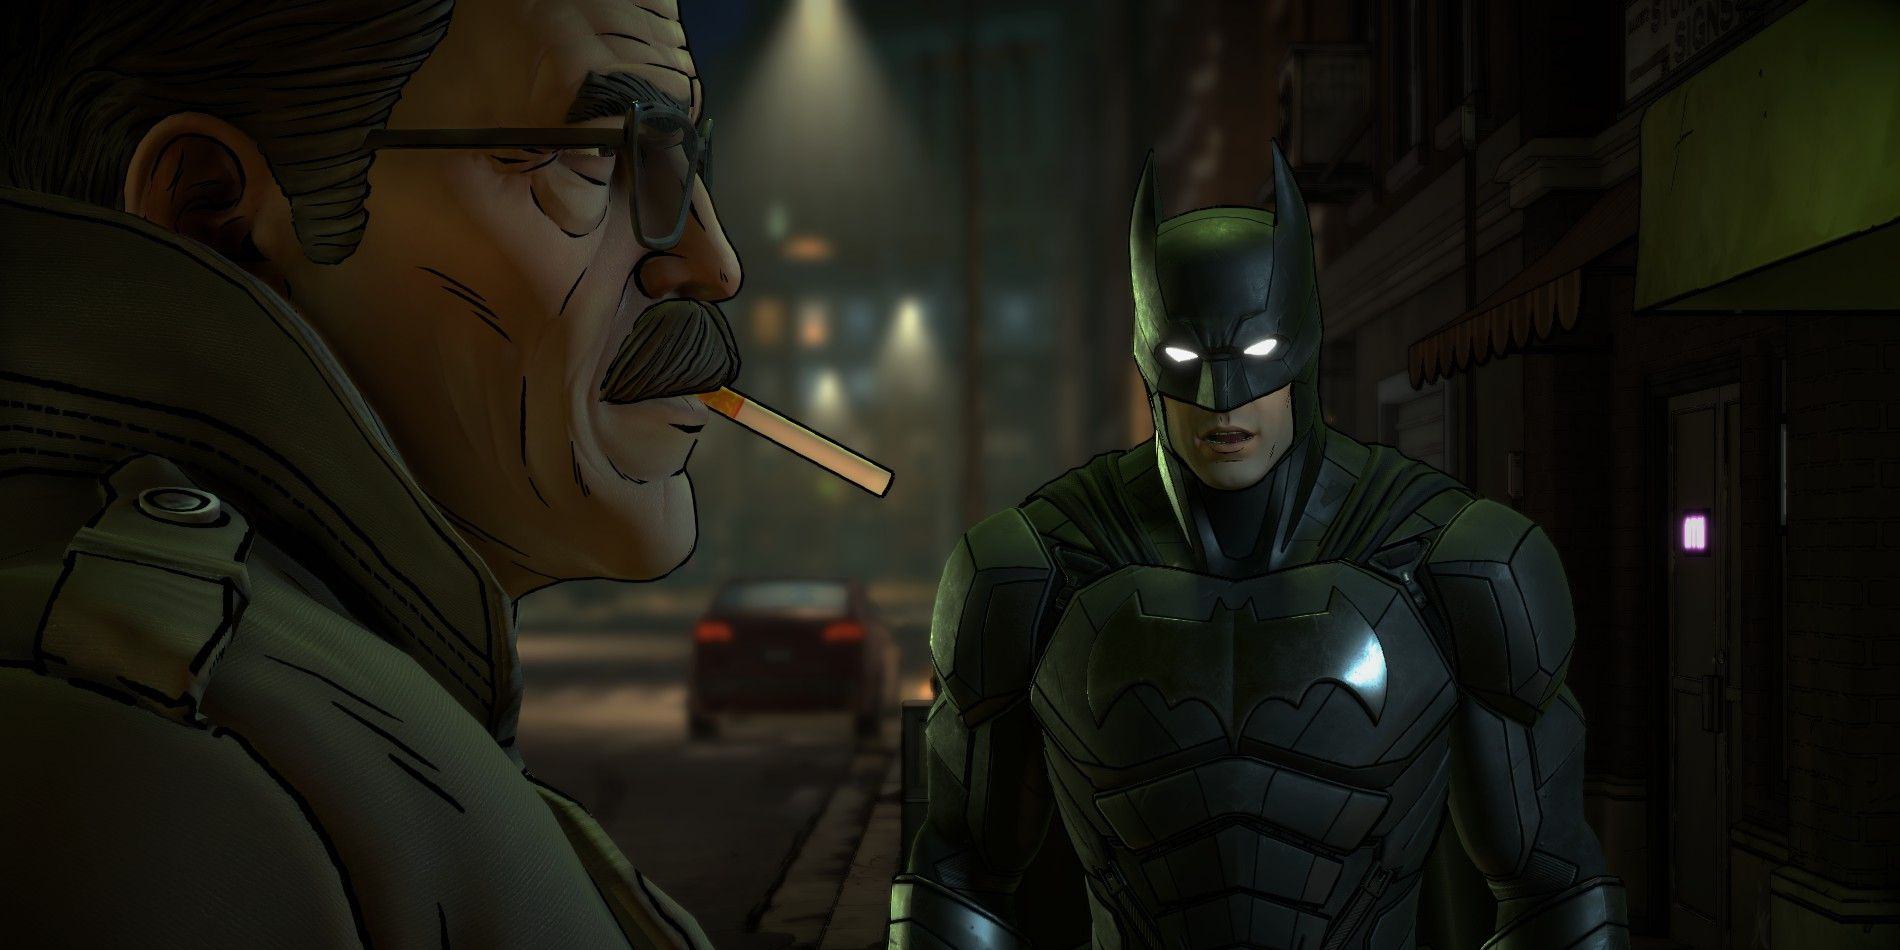 Image of Batman and Gordon in the Telltale . series